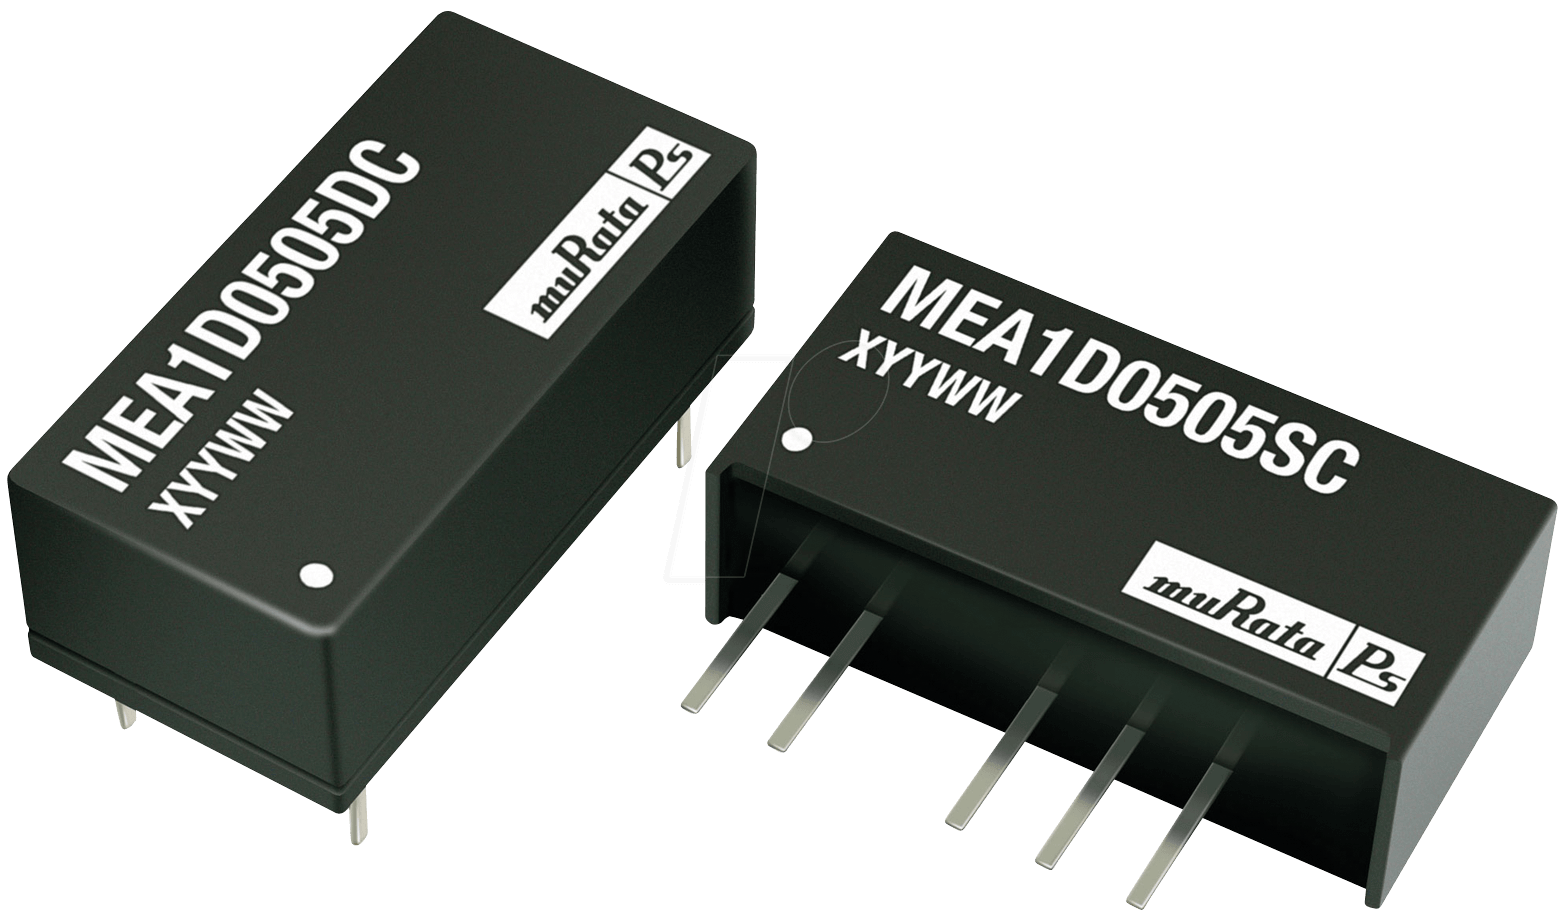 MEA1D1205SC - DC/DC-Wandler MEA, 1 W, 5 V, 100 mA, SIL, Dual von MURATA POWER SOLUTIONS